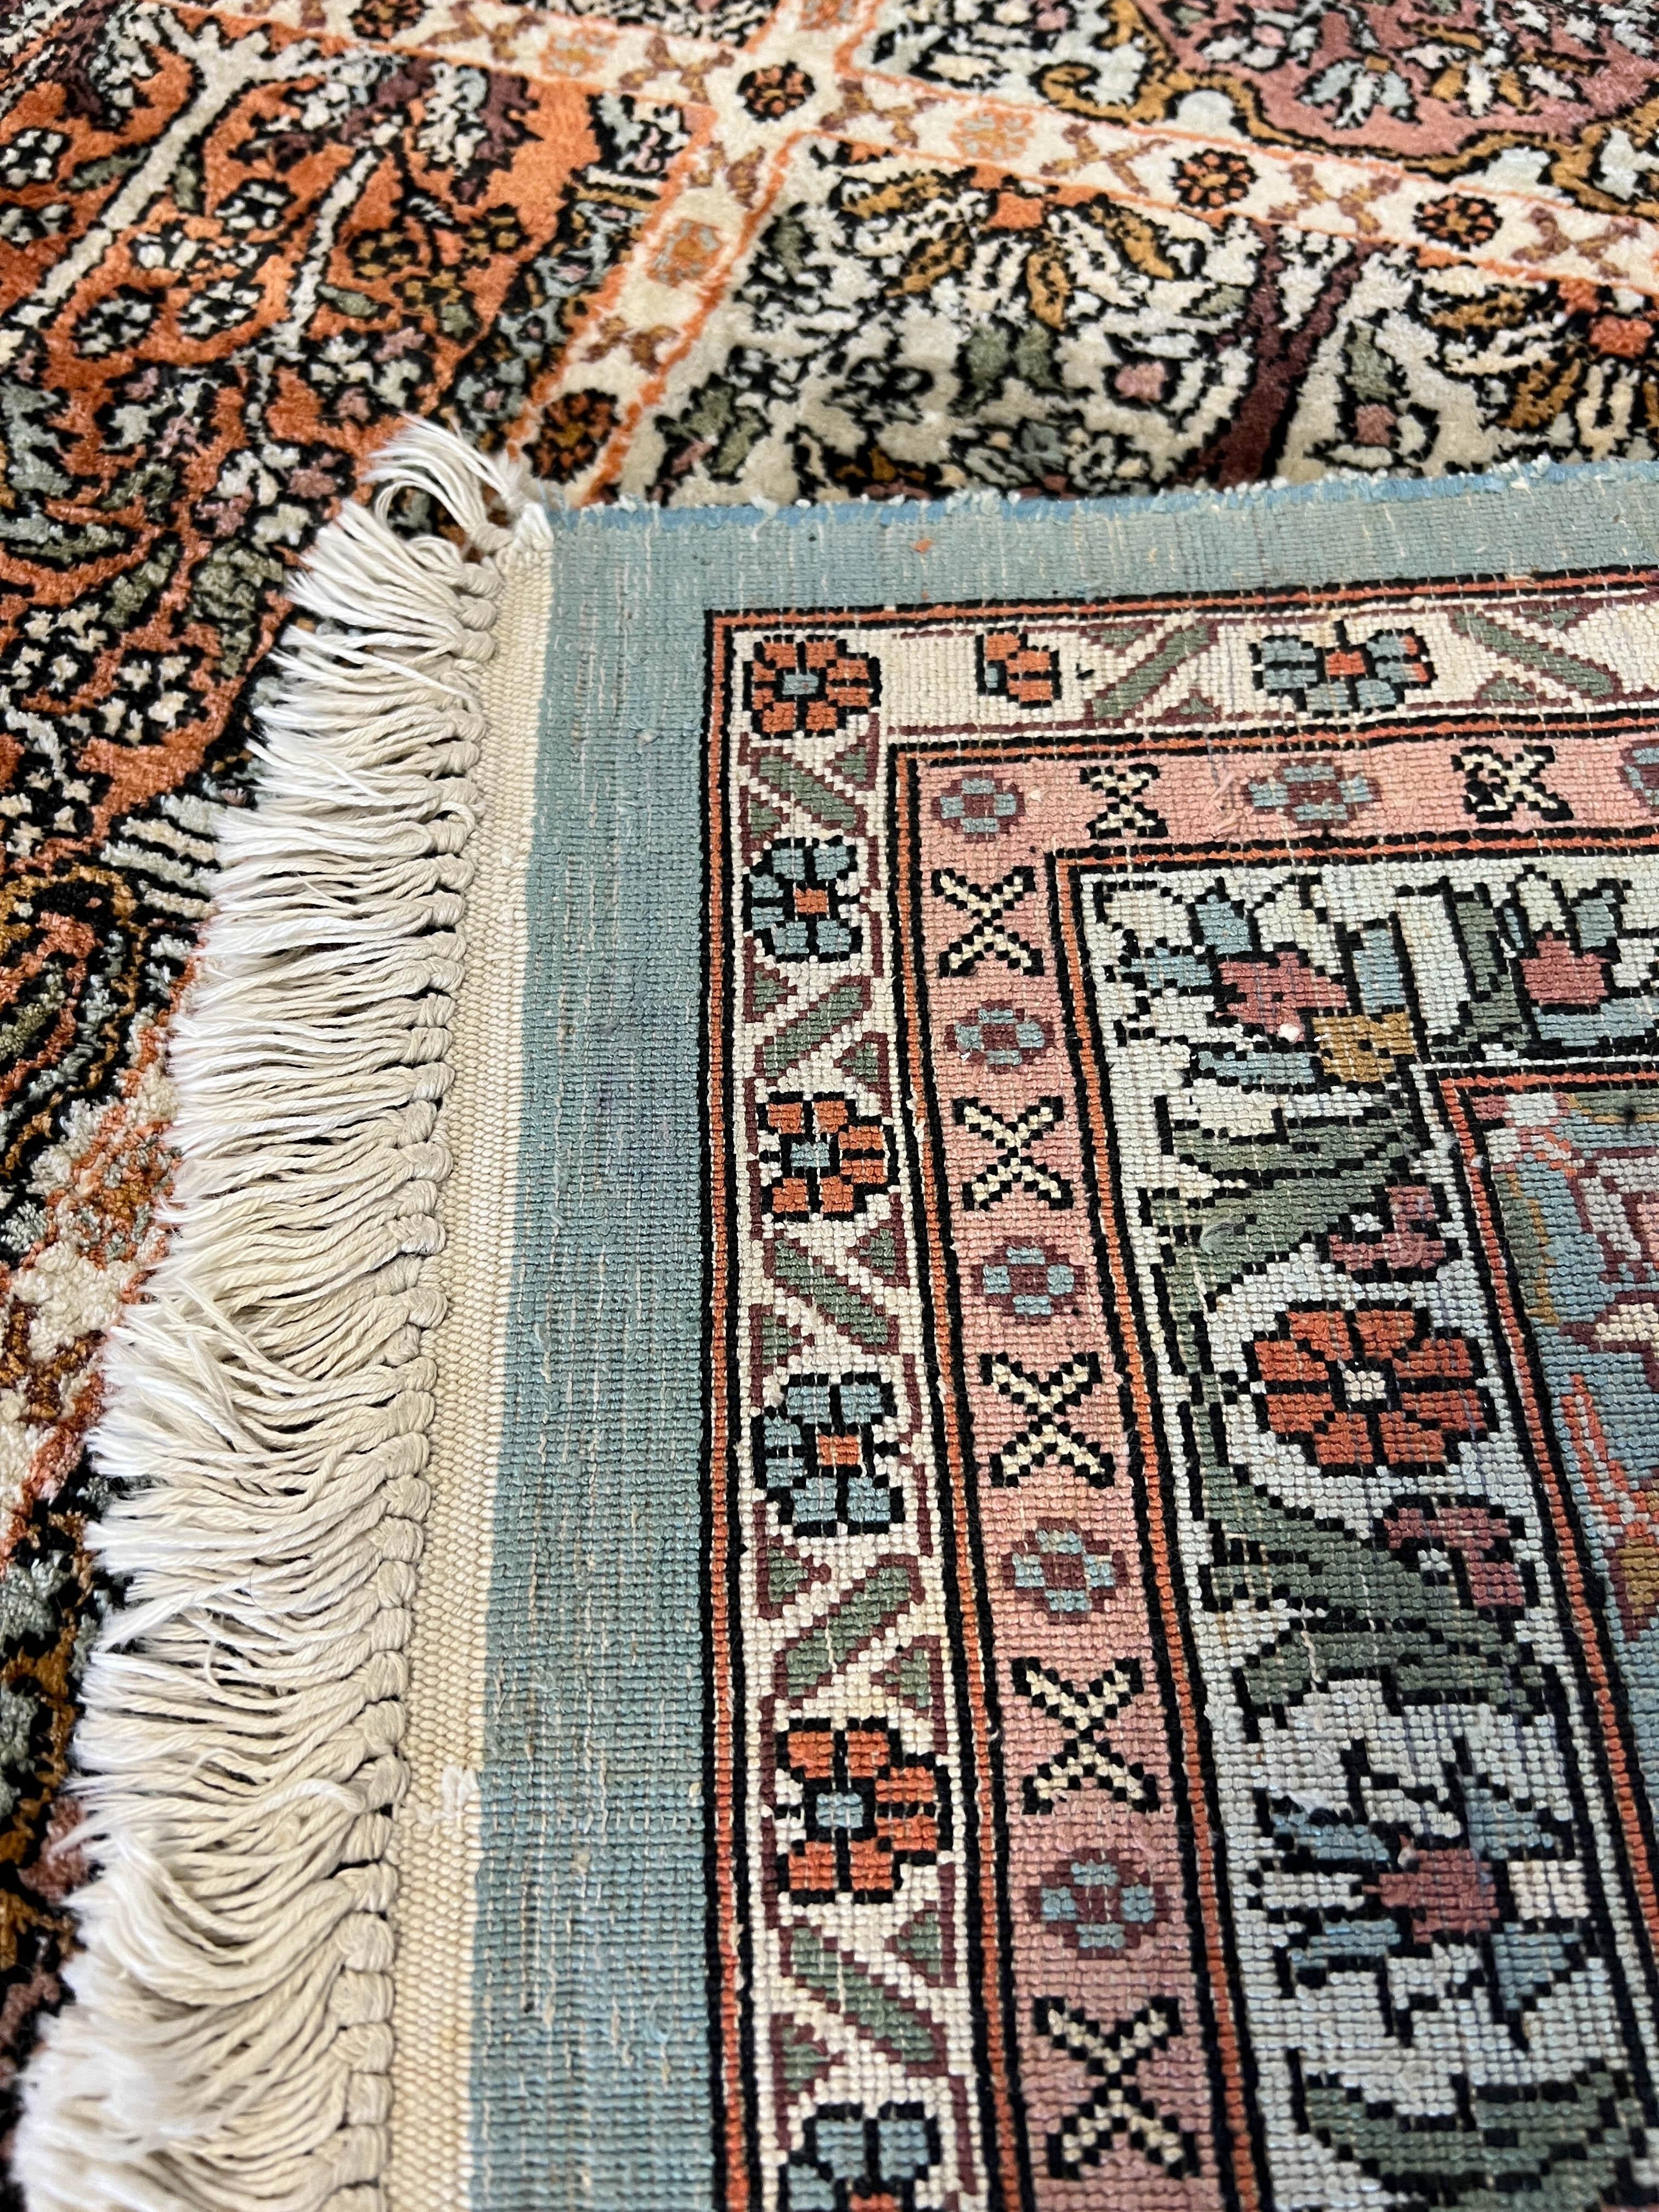 Hand-Knotted Kashmir Silk Pile Rug - 12' x 18' For Sale 12